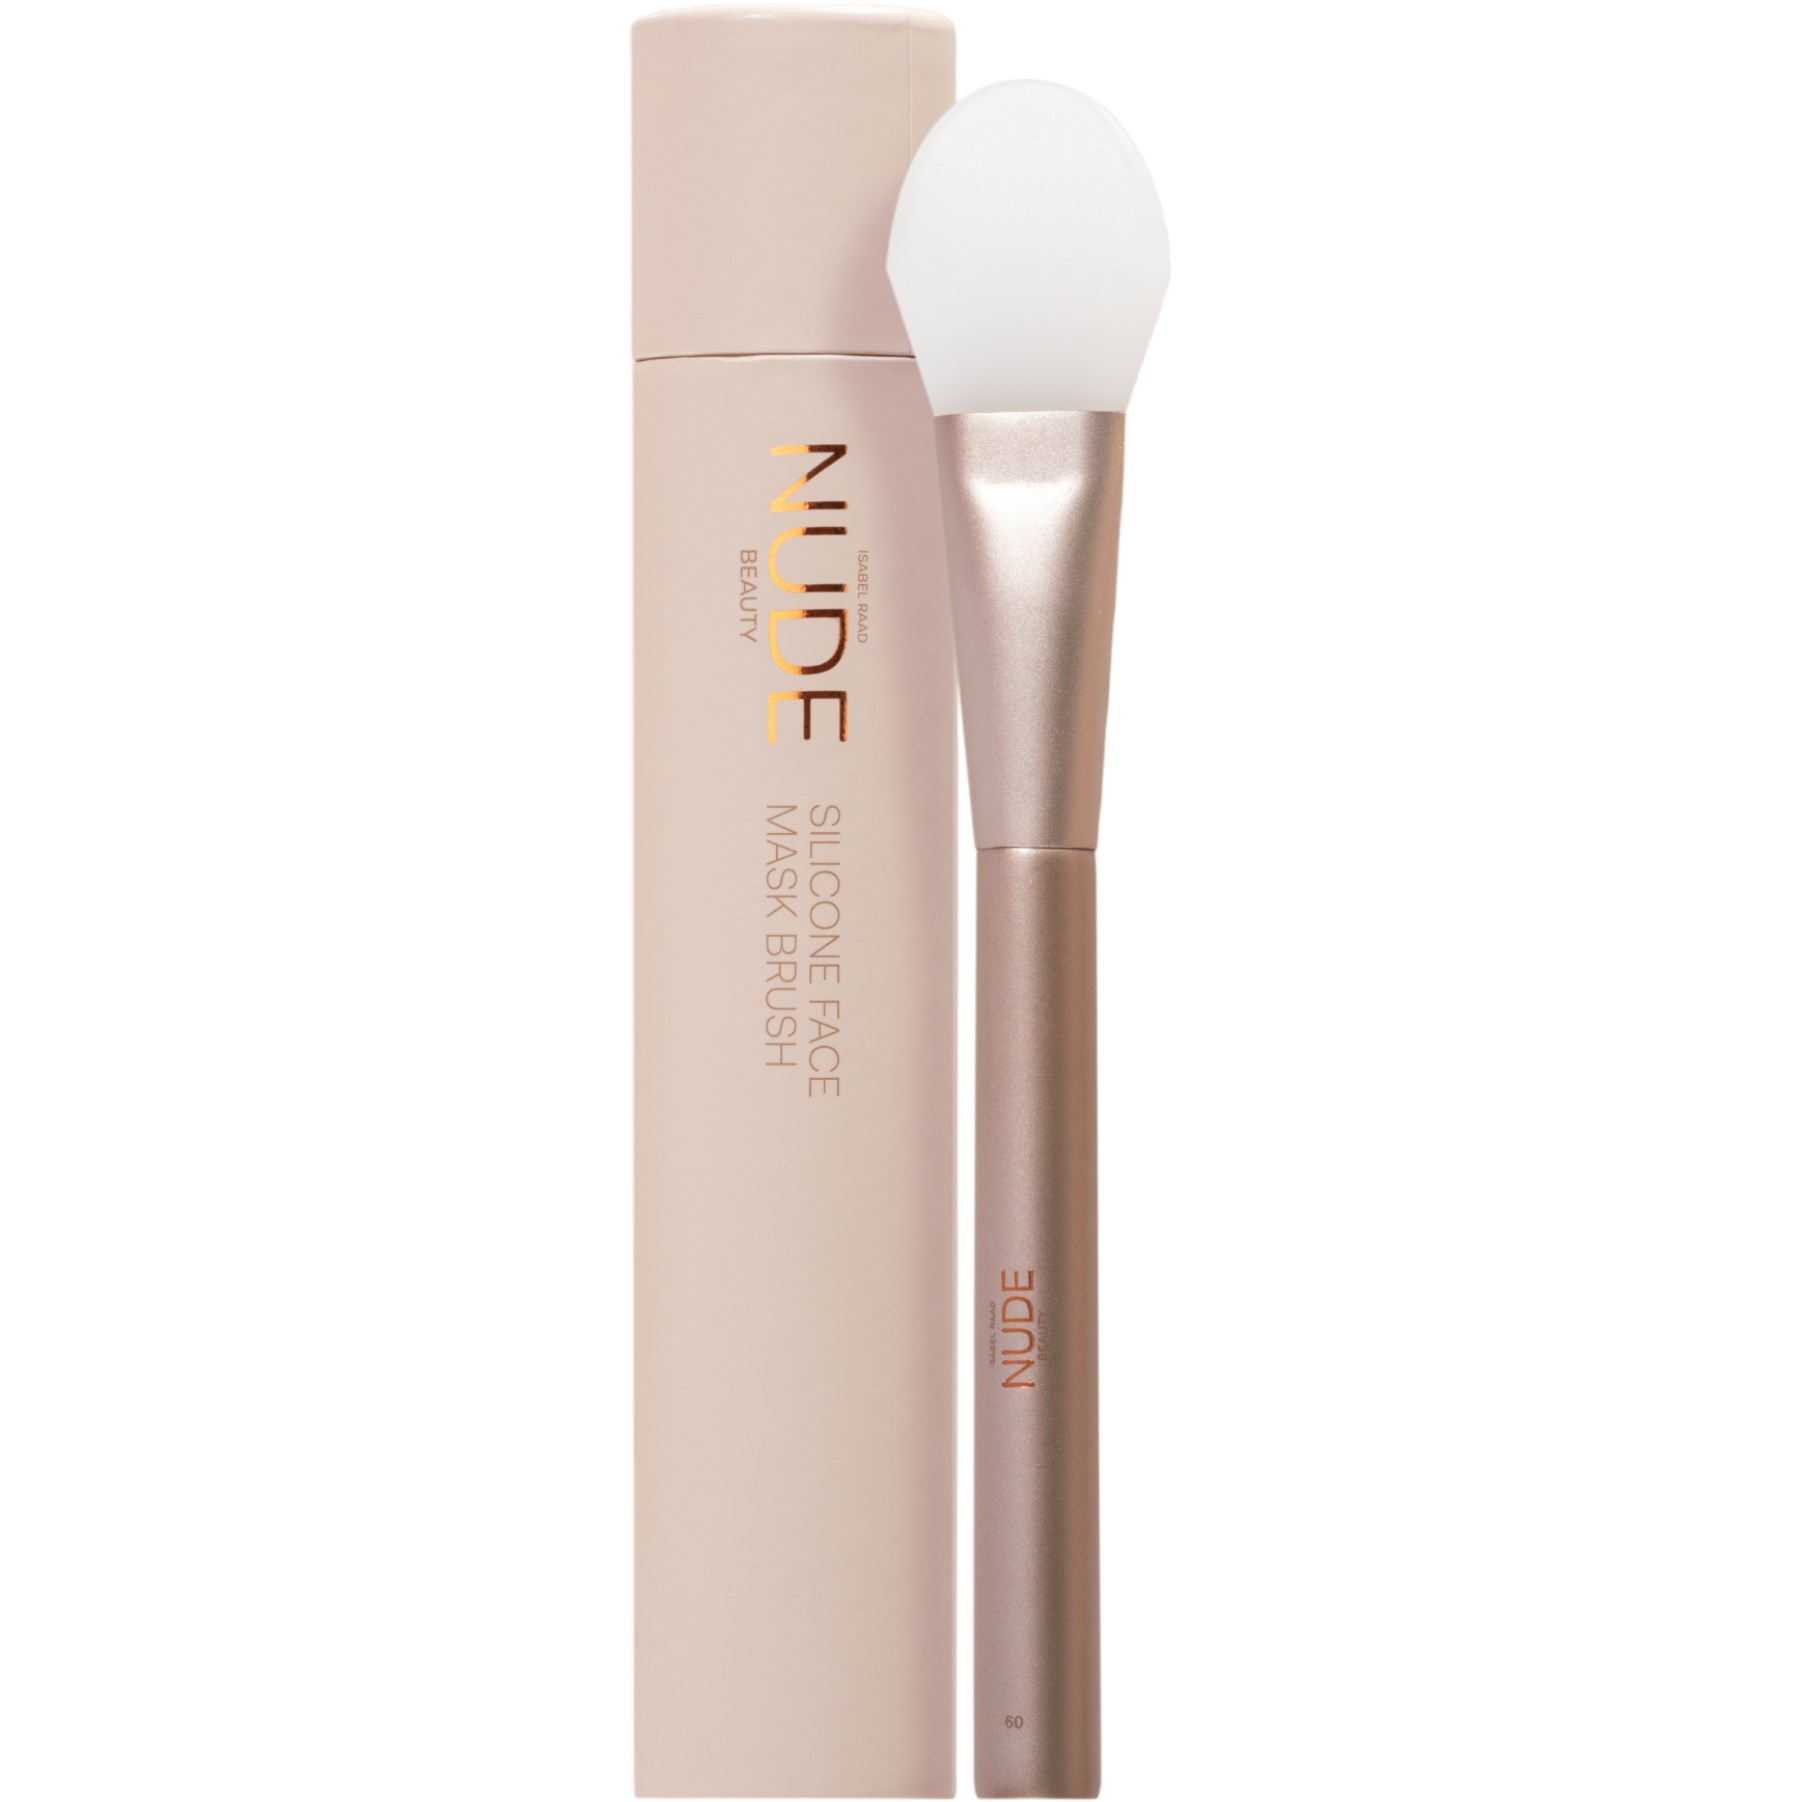 Läs mer om Nude Beauty Silicone Face Mask Brush